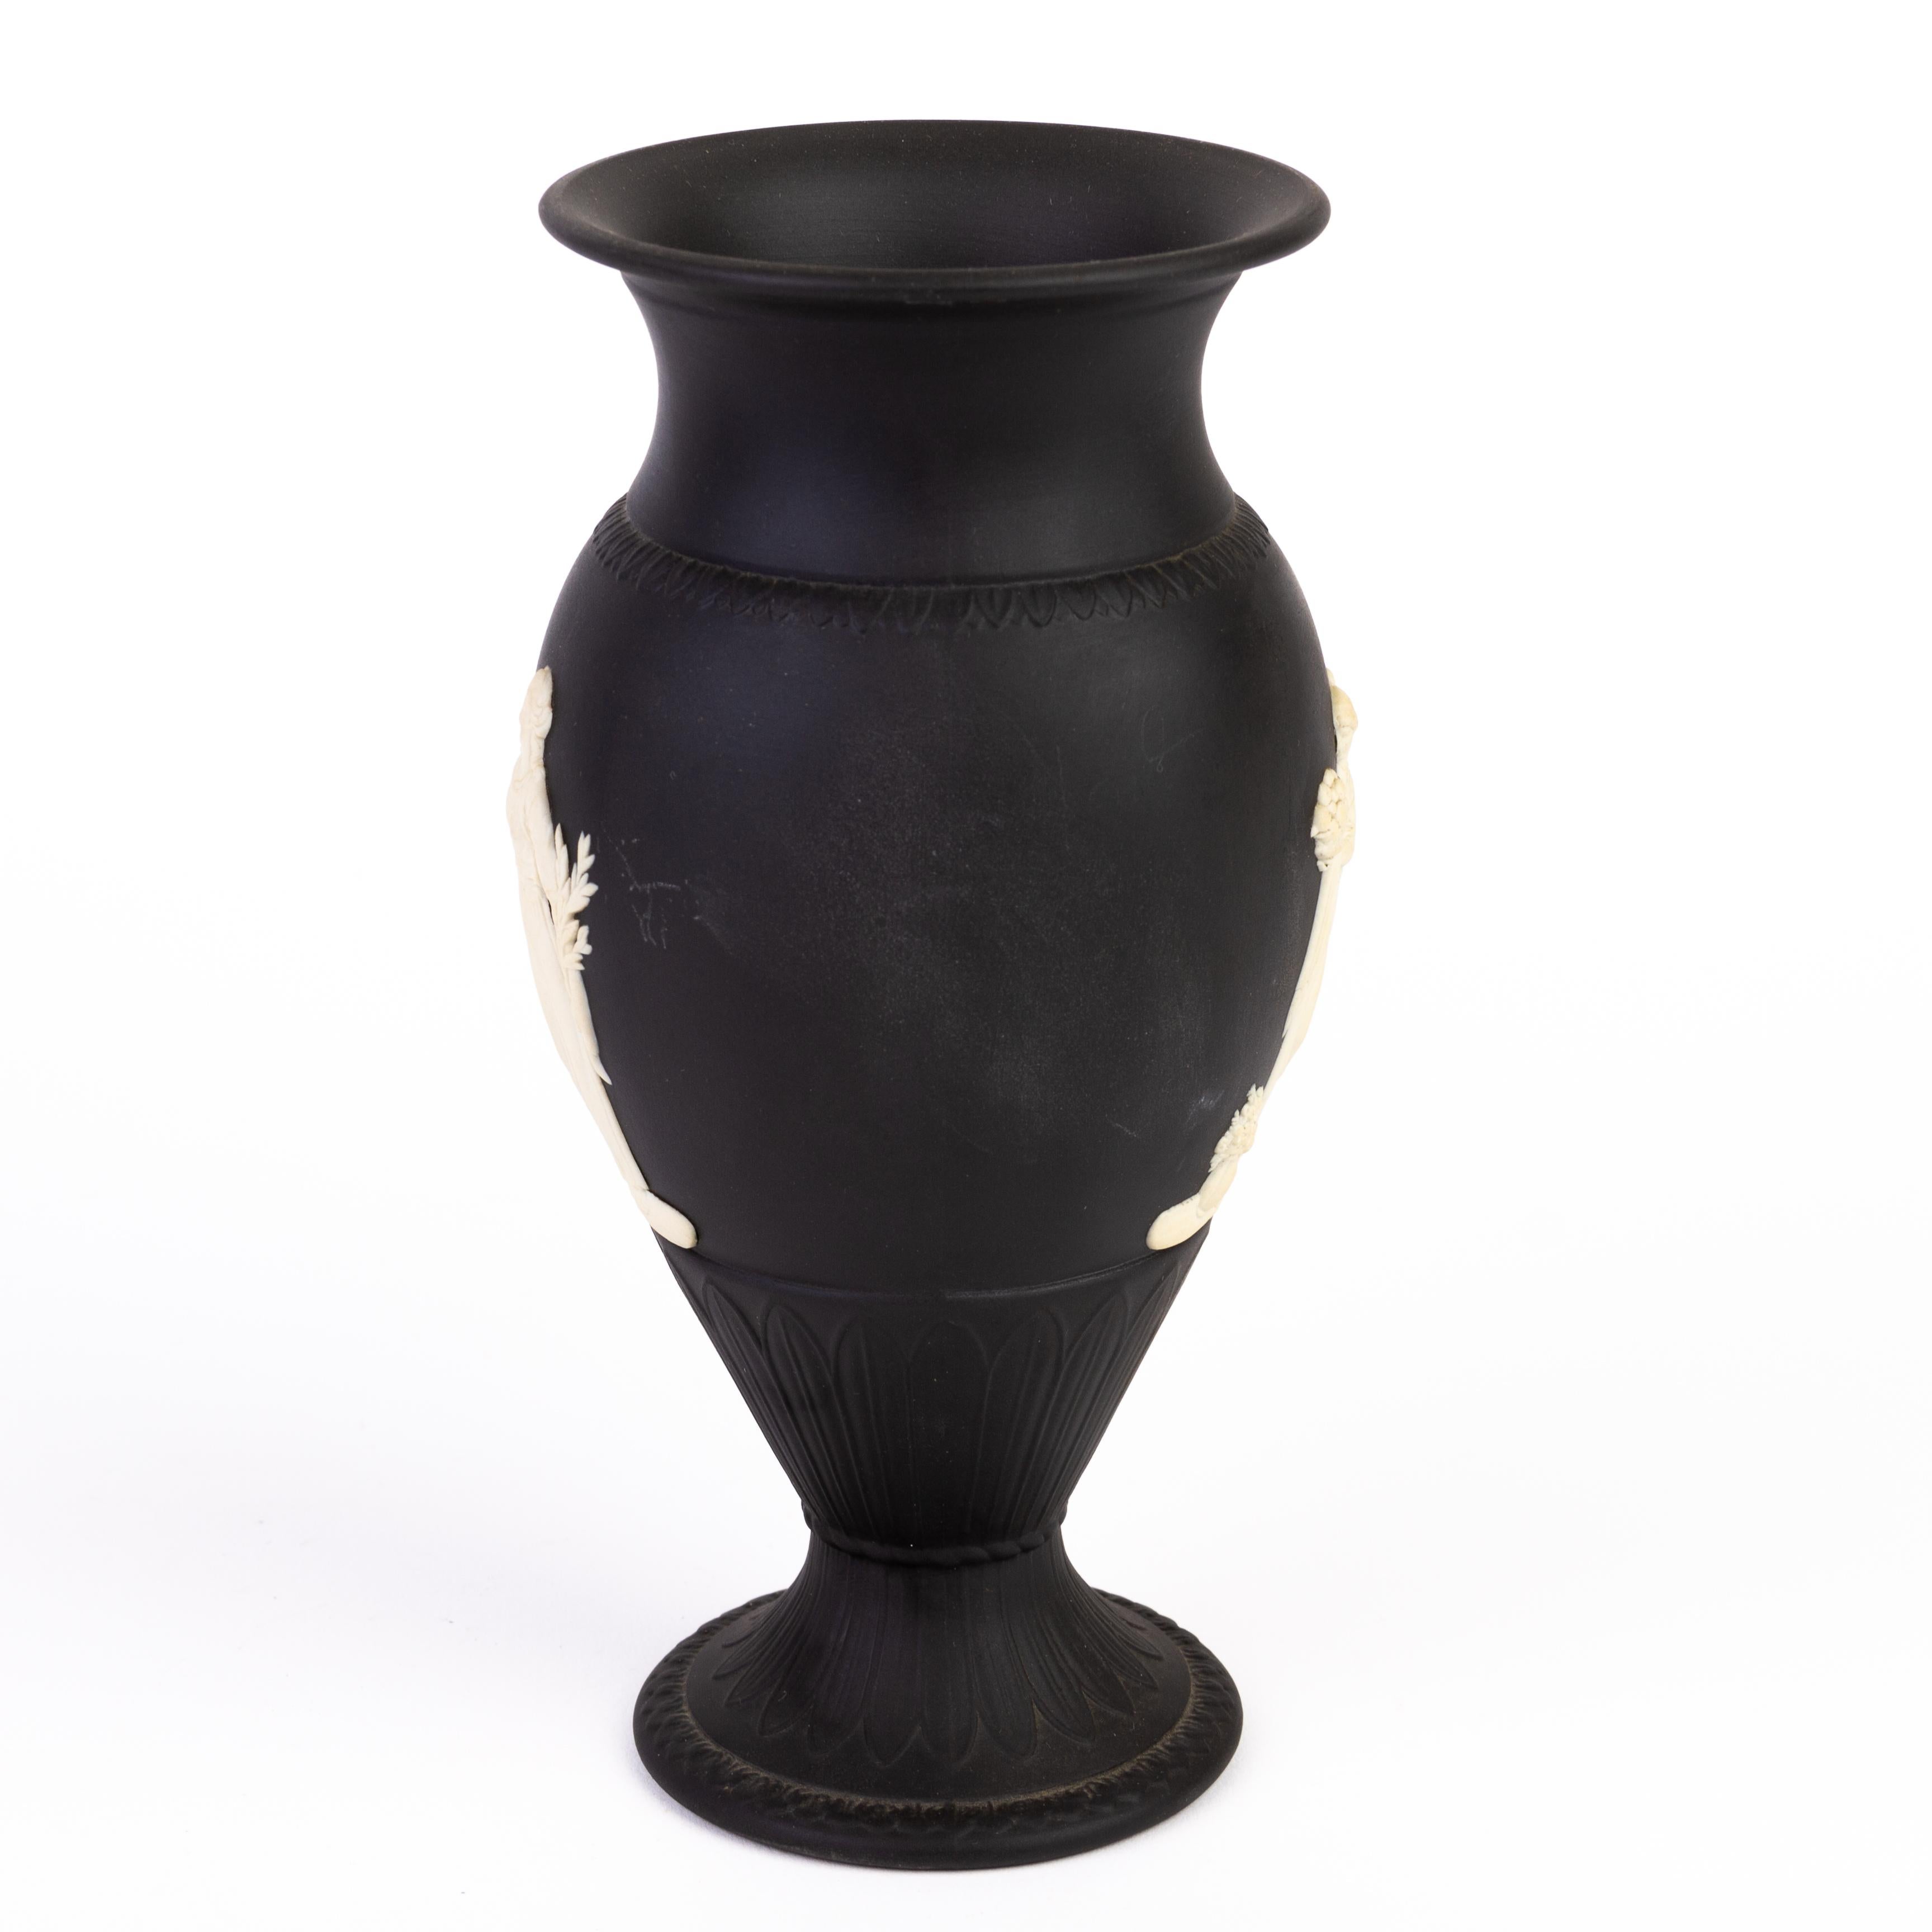 From a private collection.
Free international shipping.
Wedgwood Black Basalt Neoclassical Vase